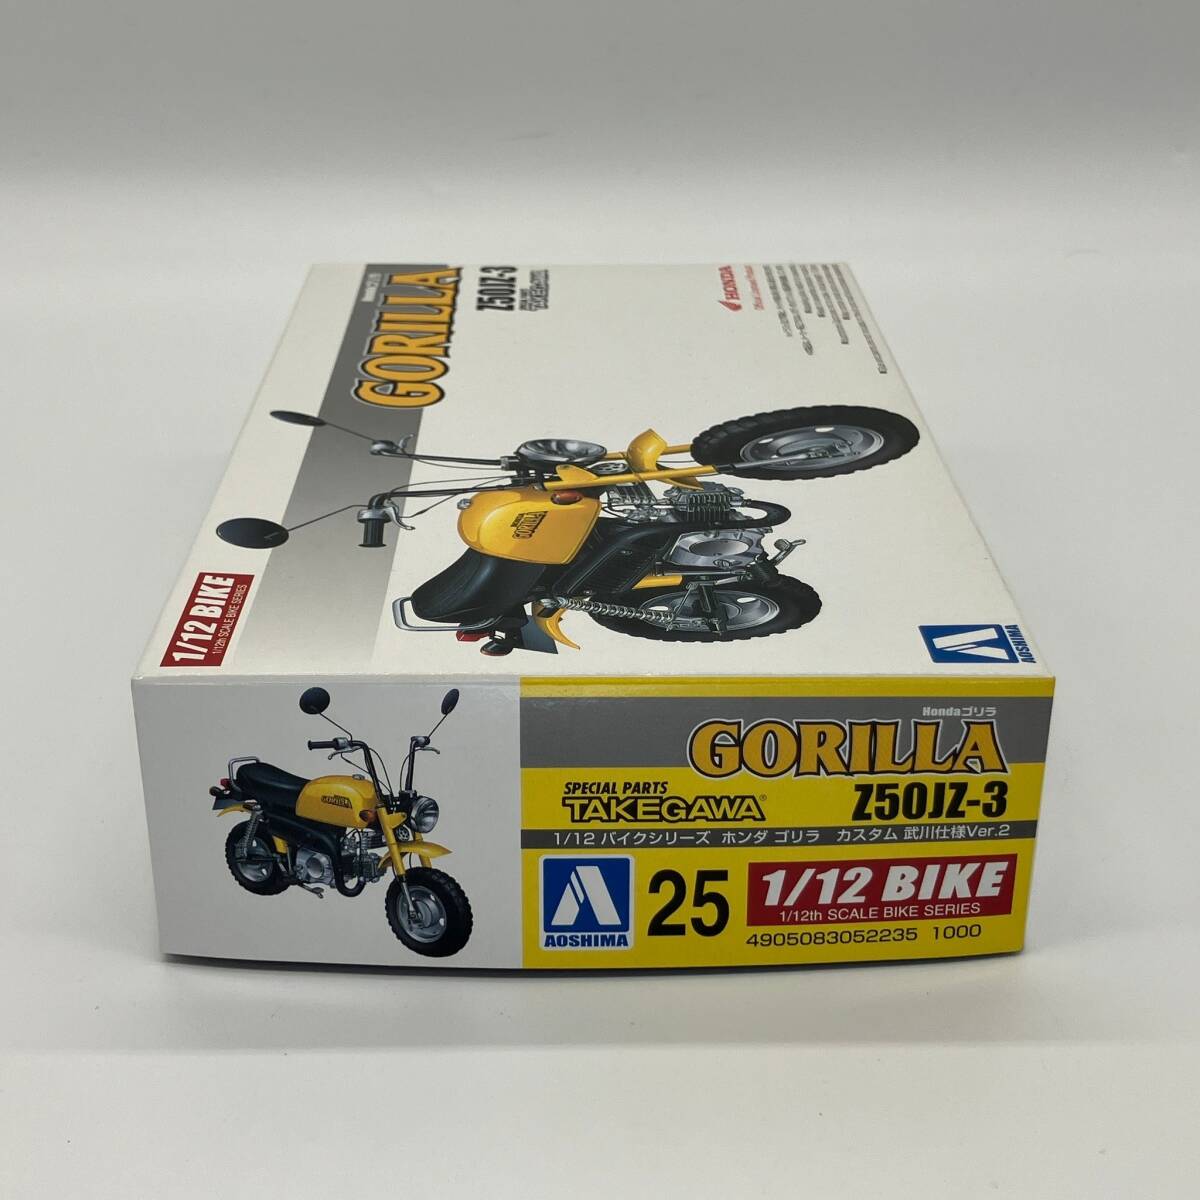 [ outright sales!] not yet assembly plastic model AOSHIMA Aoshima HONDA GORILLA Honda Gorilla Z50JZ-3 custom Takegawa specification Ver.2 No,25 1/12